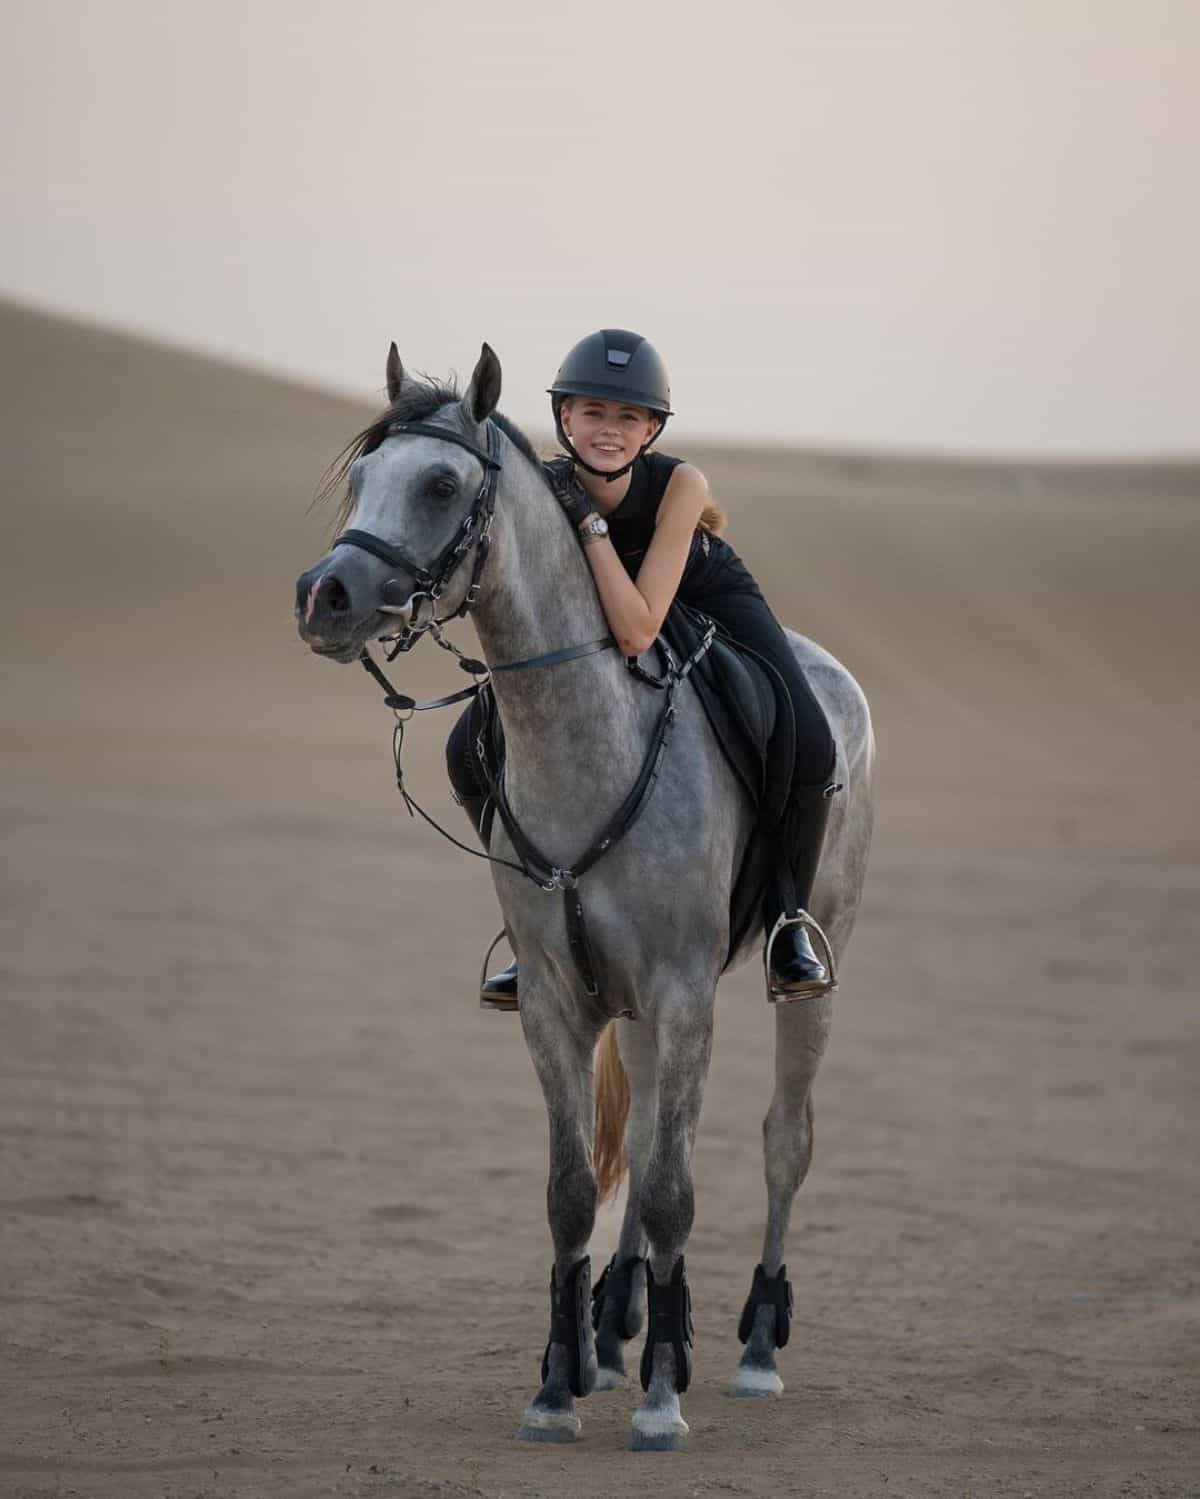 A young girl sits on a gray Arabian horse.